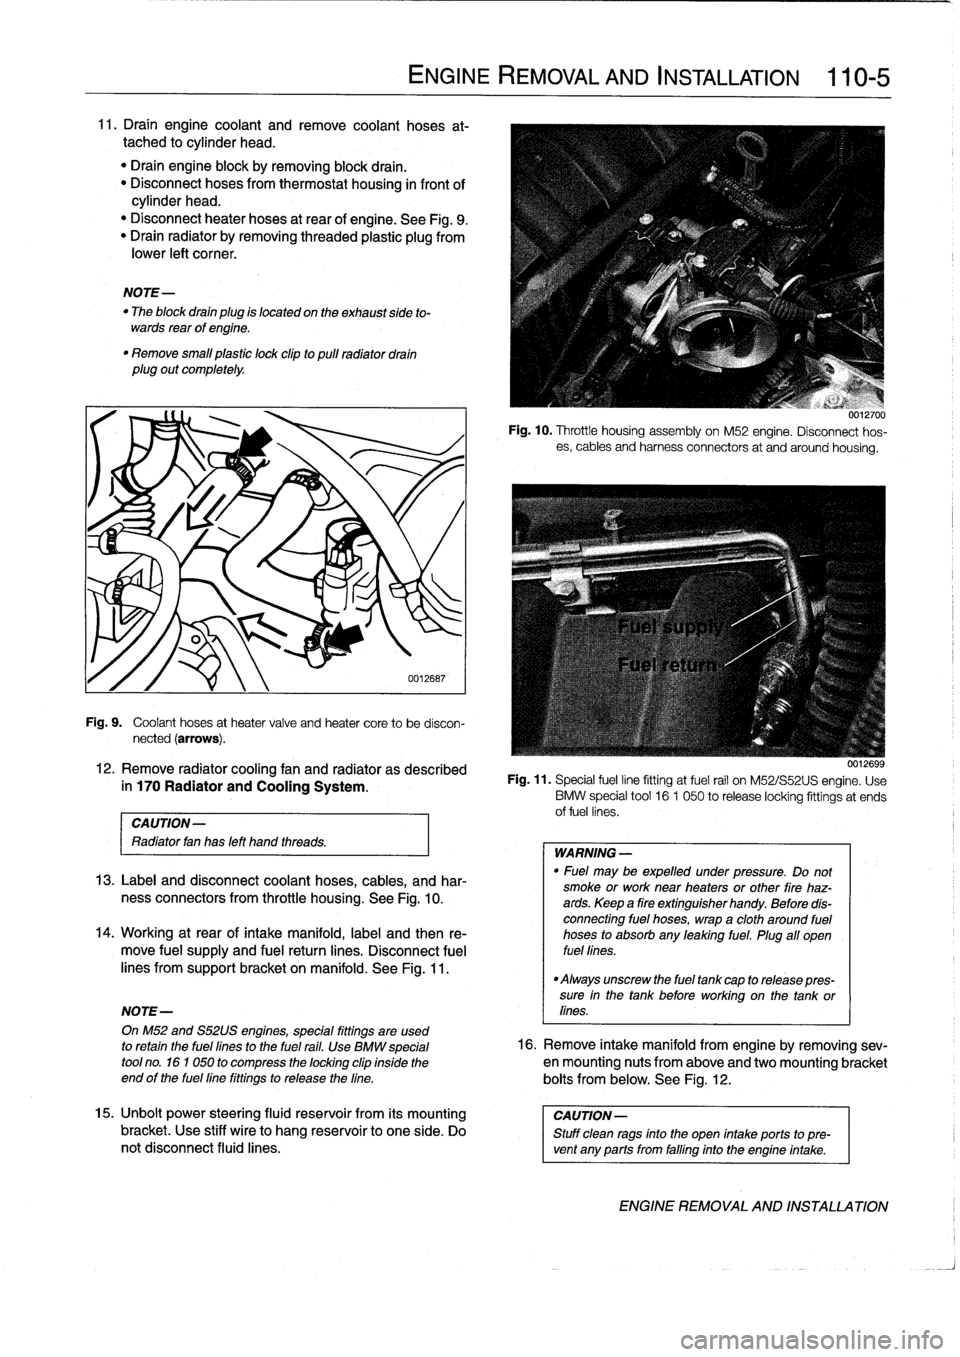 BMW M3 1996 E36 Workshop Manual 
11
.
Draín
engine
coolant
and
Rmove
coolant
hoses
at-
tached
to
cylinder
head
.

"
Drain
engine
block
byremoving
block
drain
.
"
Disconnect
hoses
from
thermostat
housing
in
front
of
cylinder
head
.
